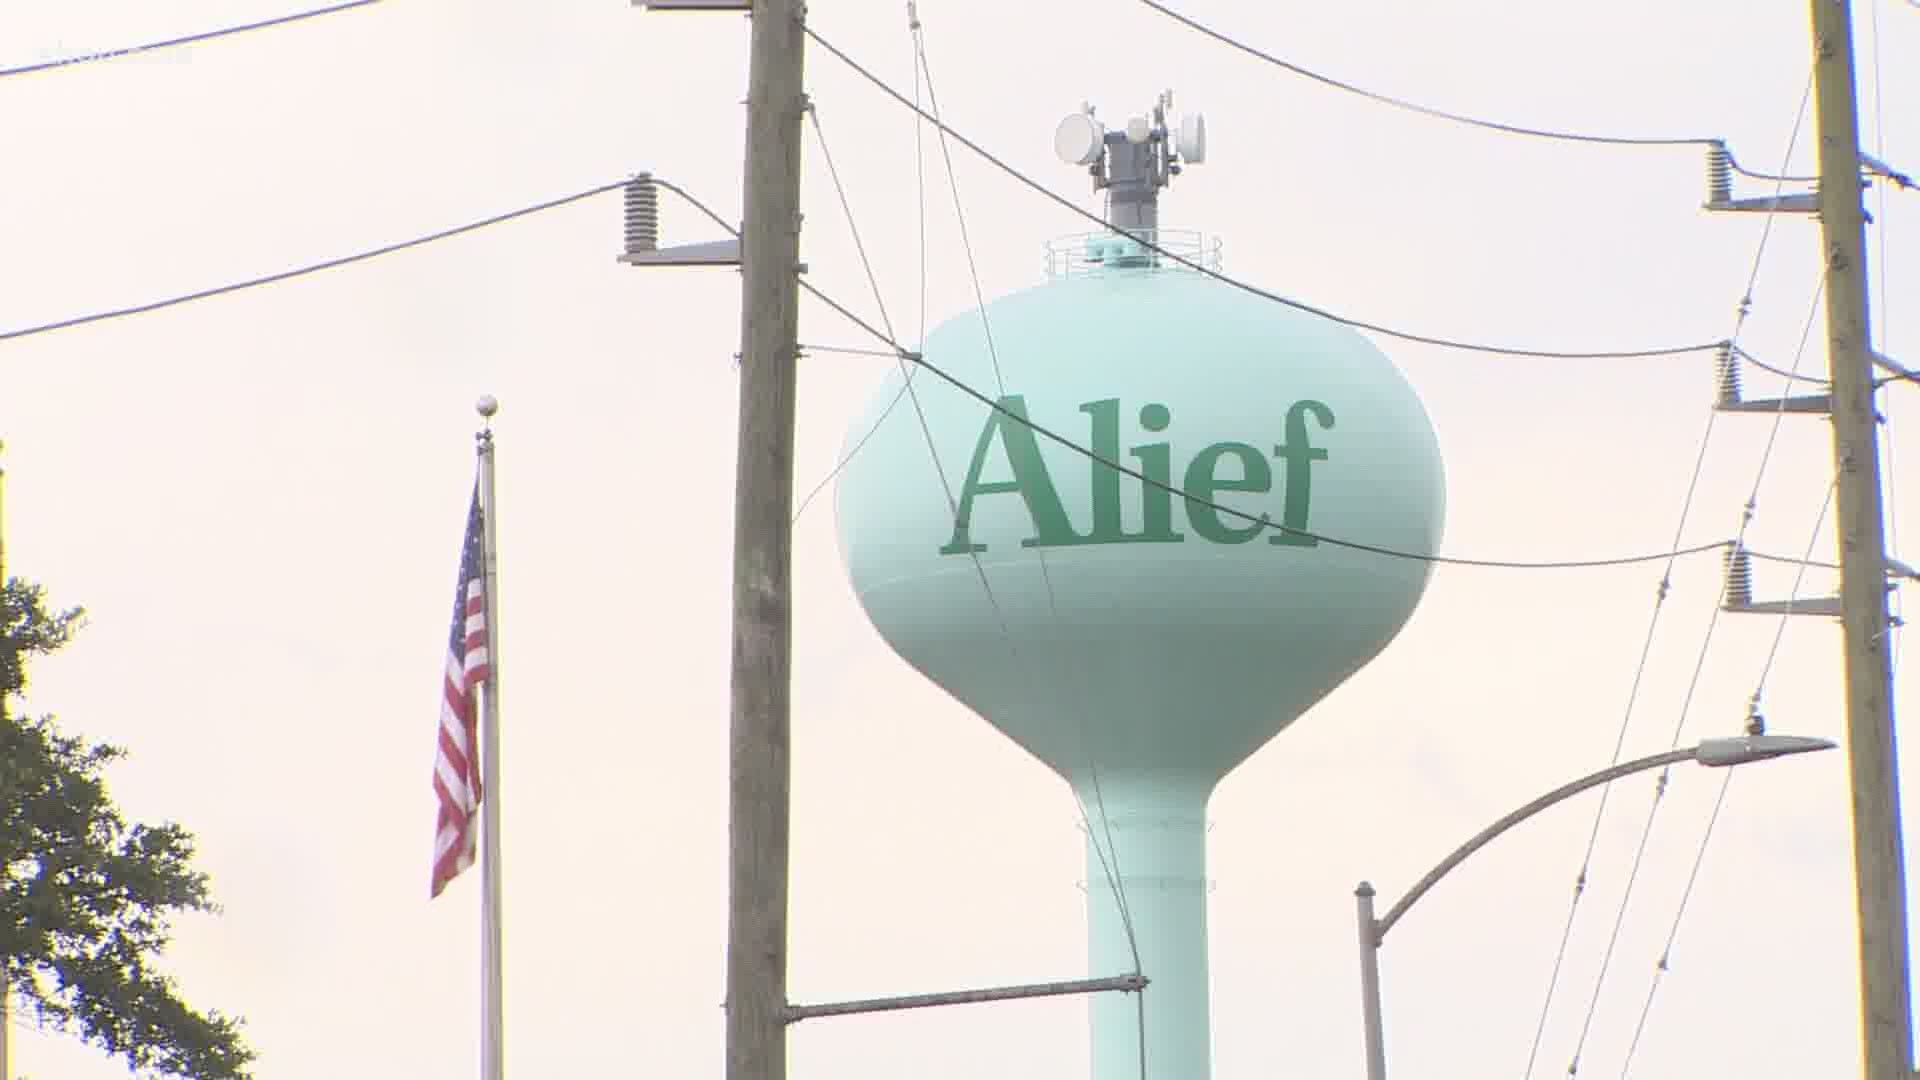 The plan for Alief ISD was formally approved Tuesday night by the school board along with the intention of remaining remote for a to-be-determined amount of time.